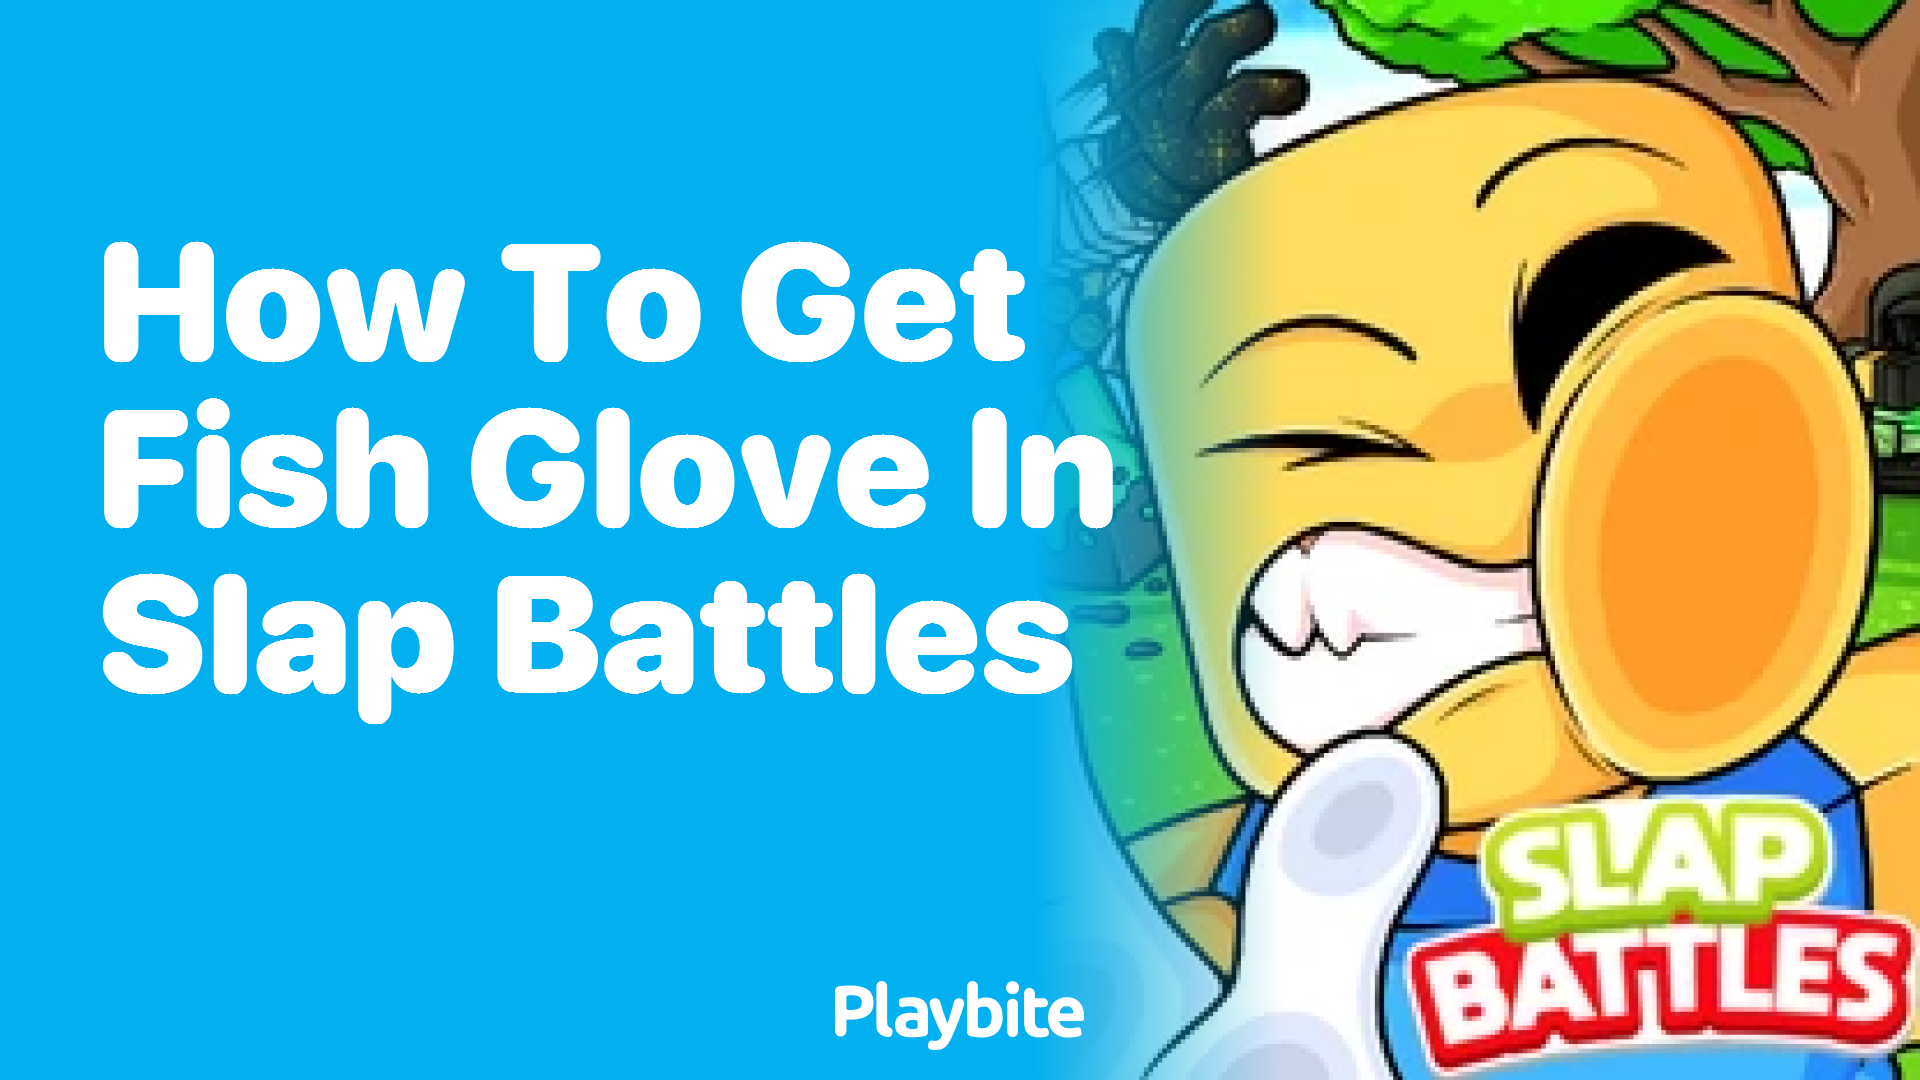 How to Get the Fish Glove in Slap Battles - Playbite